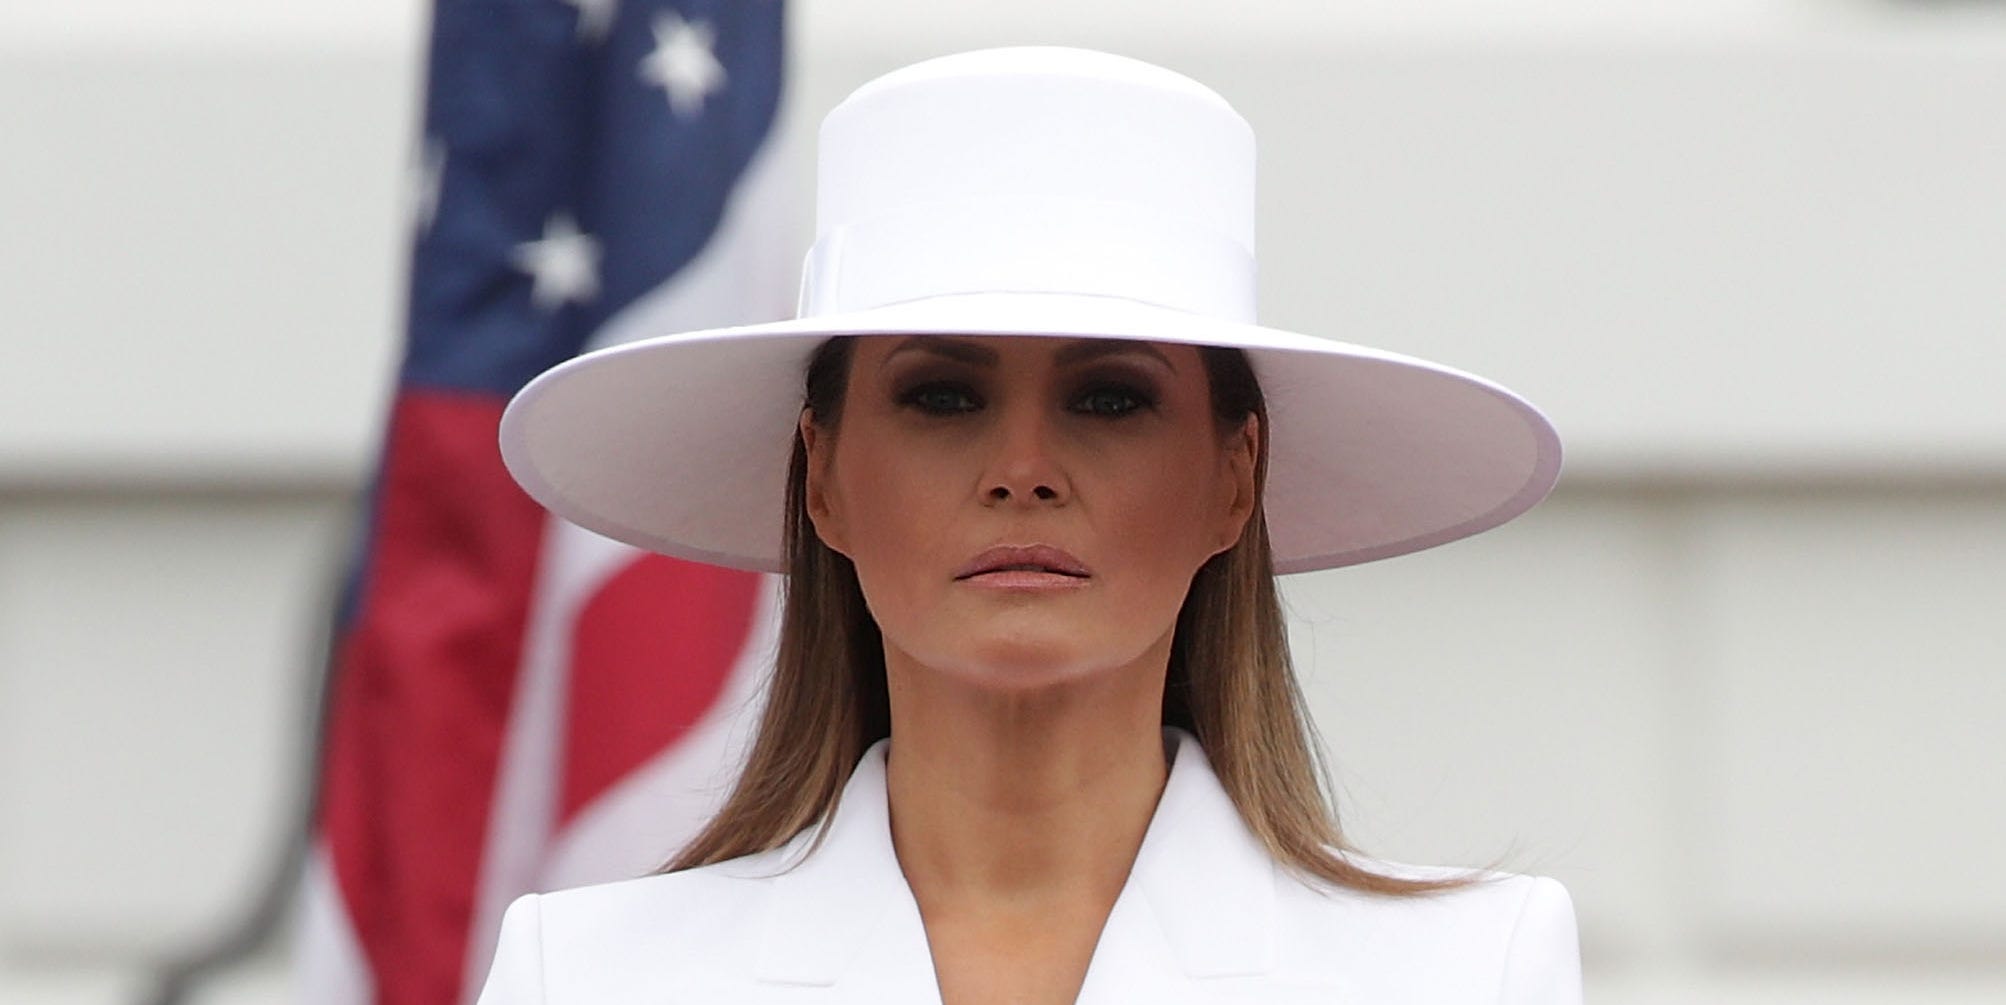 U.S. first lady Melania Trump participates in a state arrival ceremony at the South Lawn of the White House April 24, 2018 in Washington, DC.